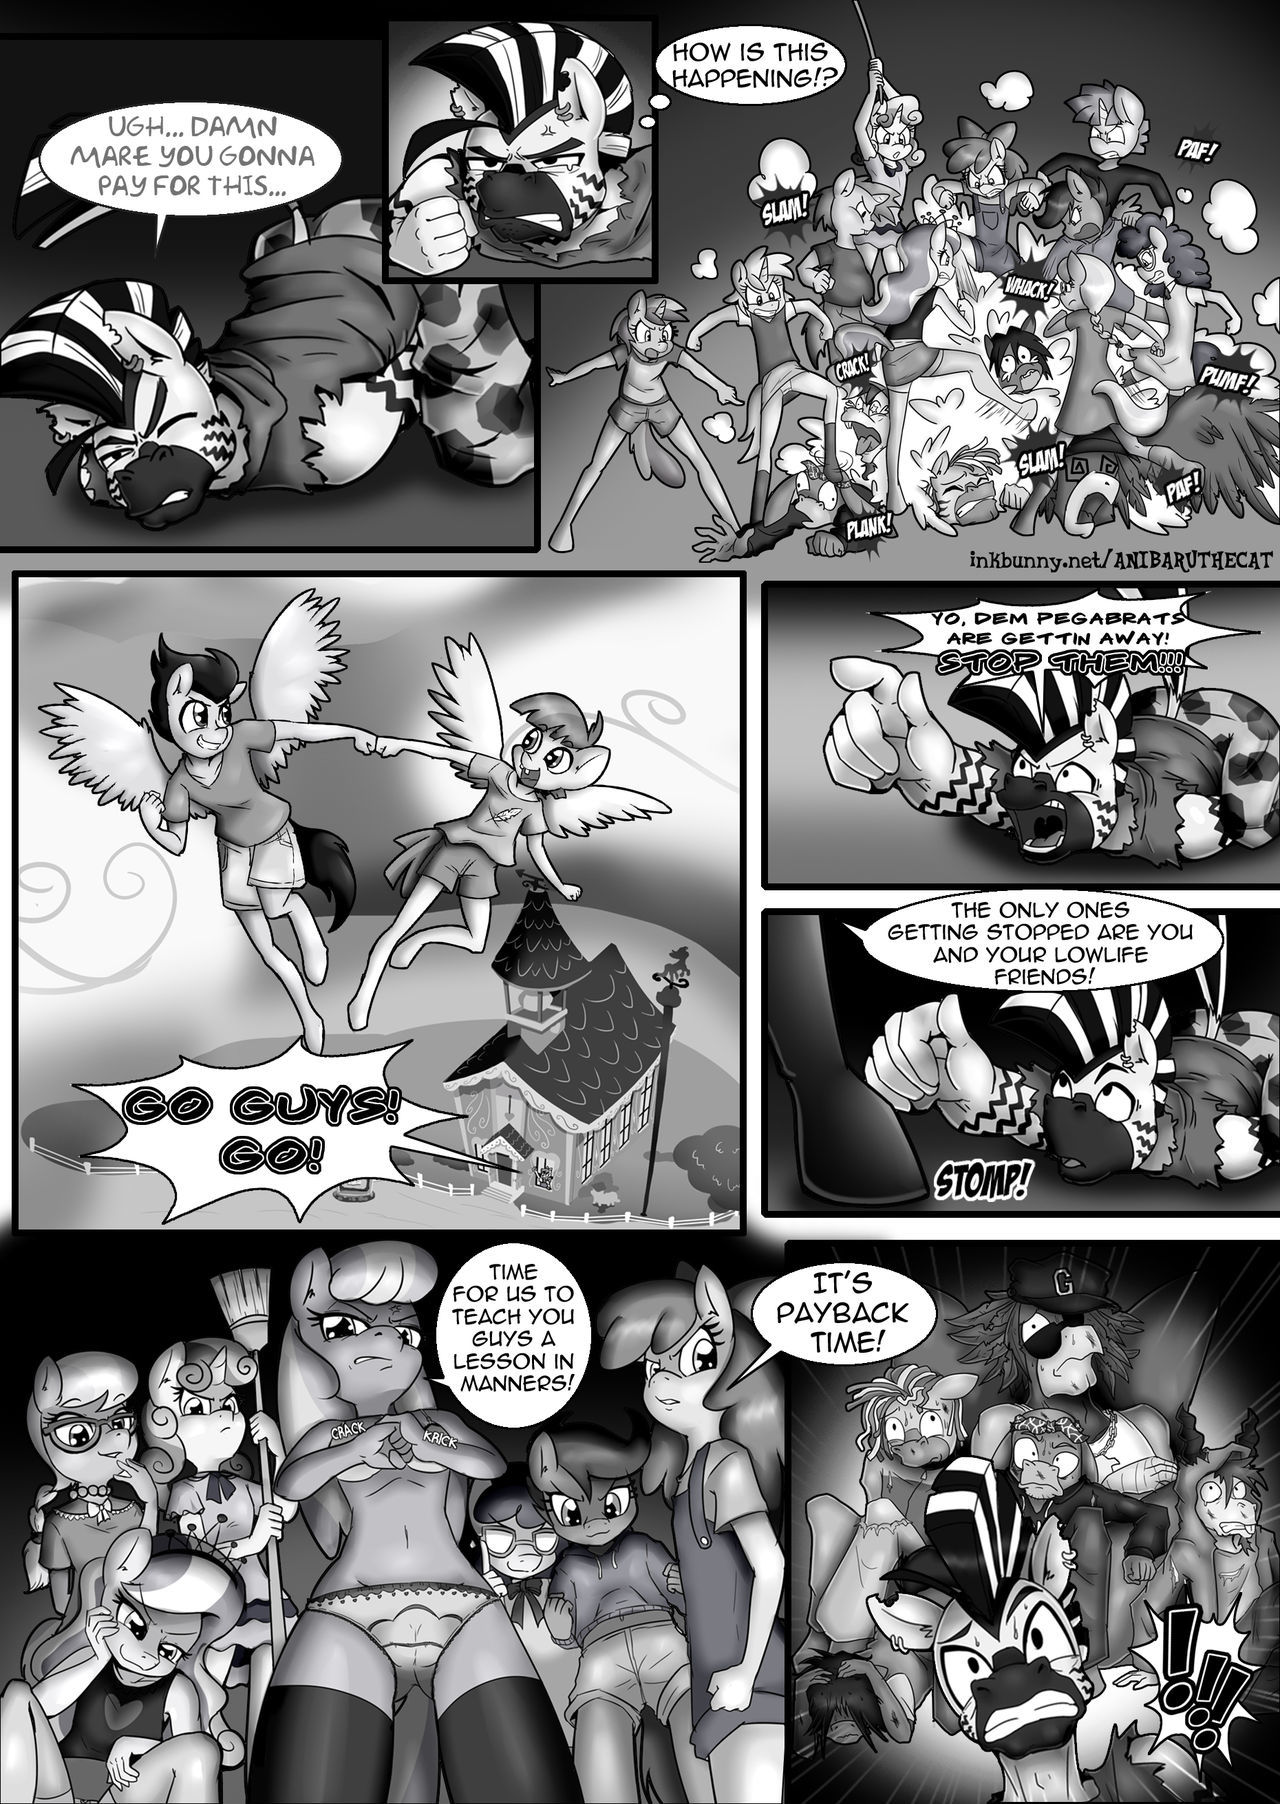 Gang Bangerz My little Pony by AnibarutheCat page 9